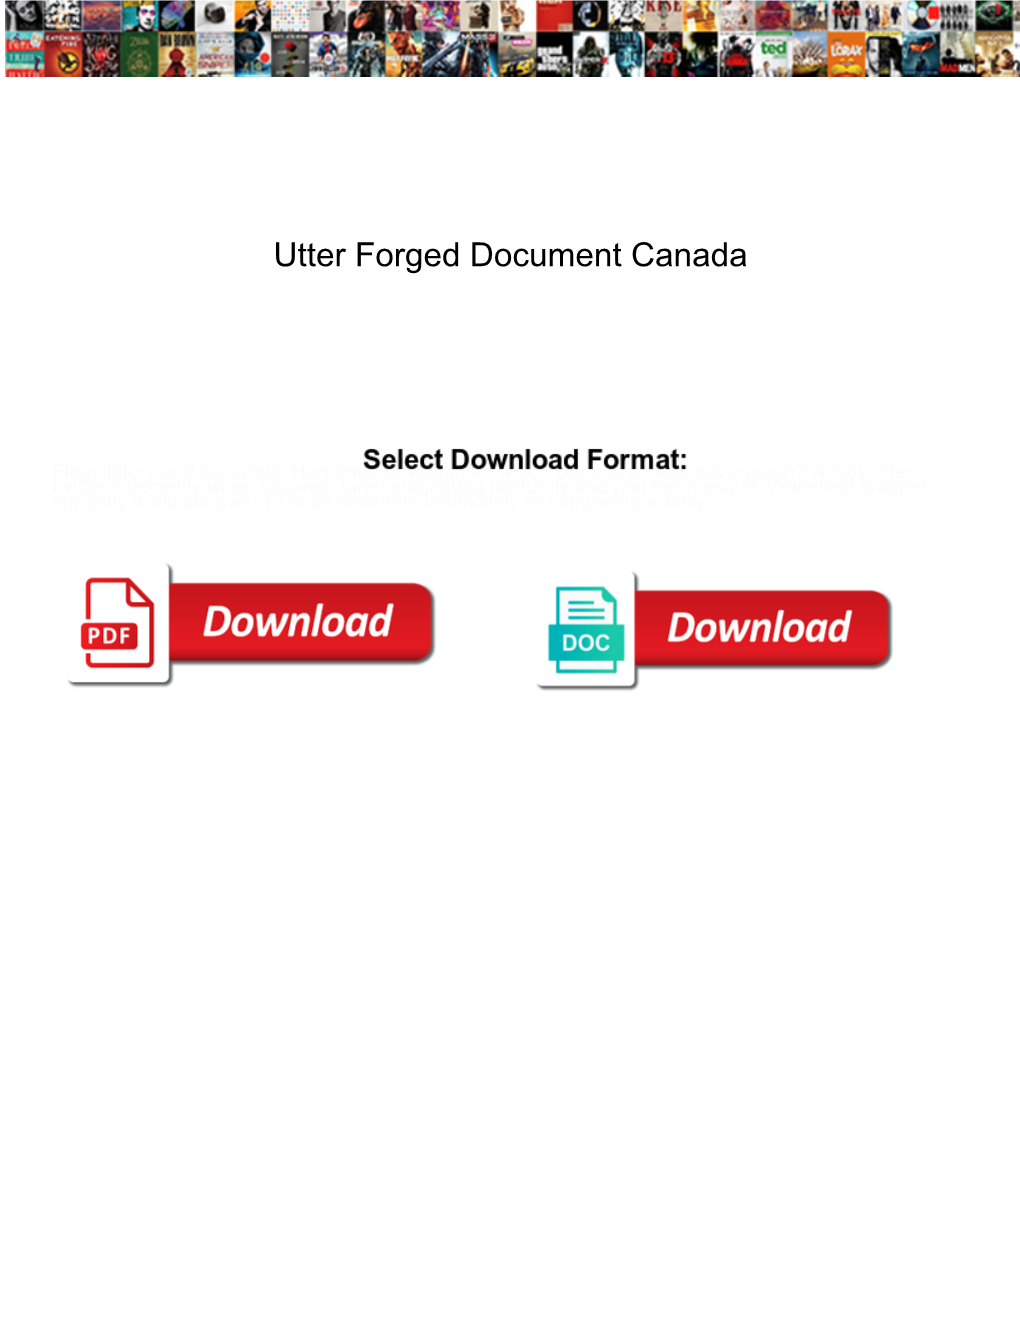 Utter Forged Document Canada